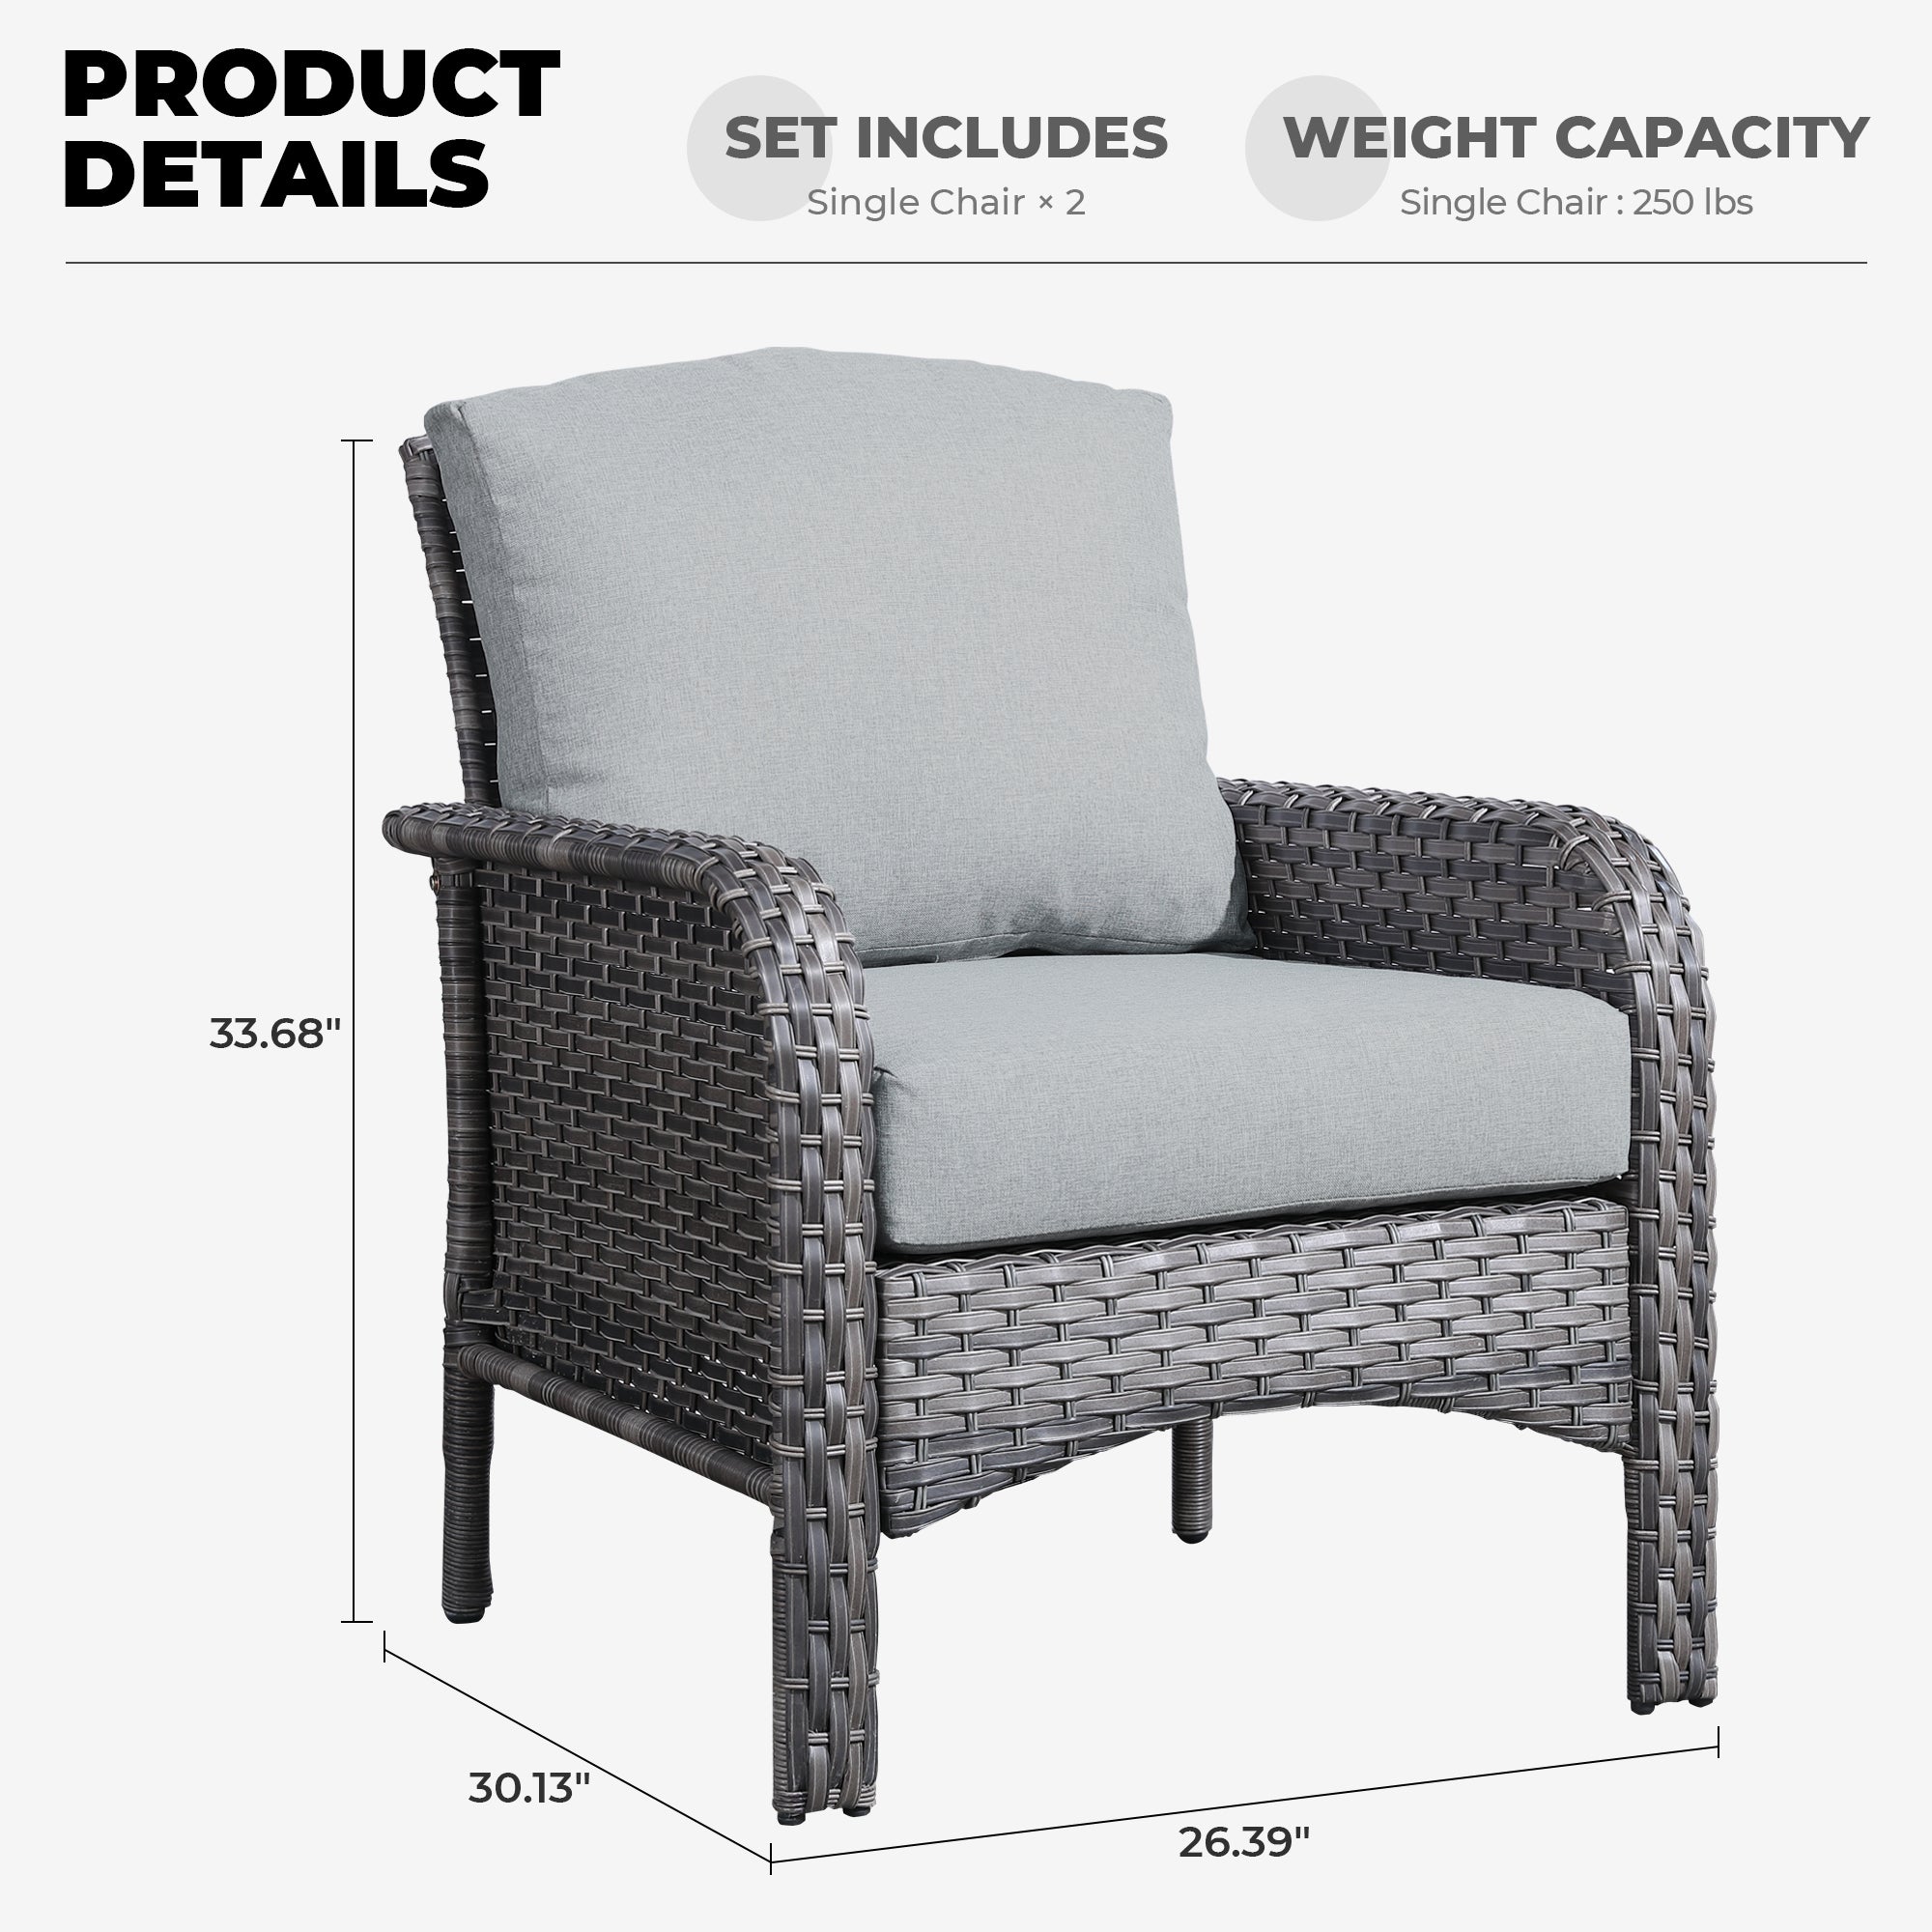 NDS Series - Outdoor Single Chair * 2